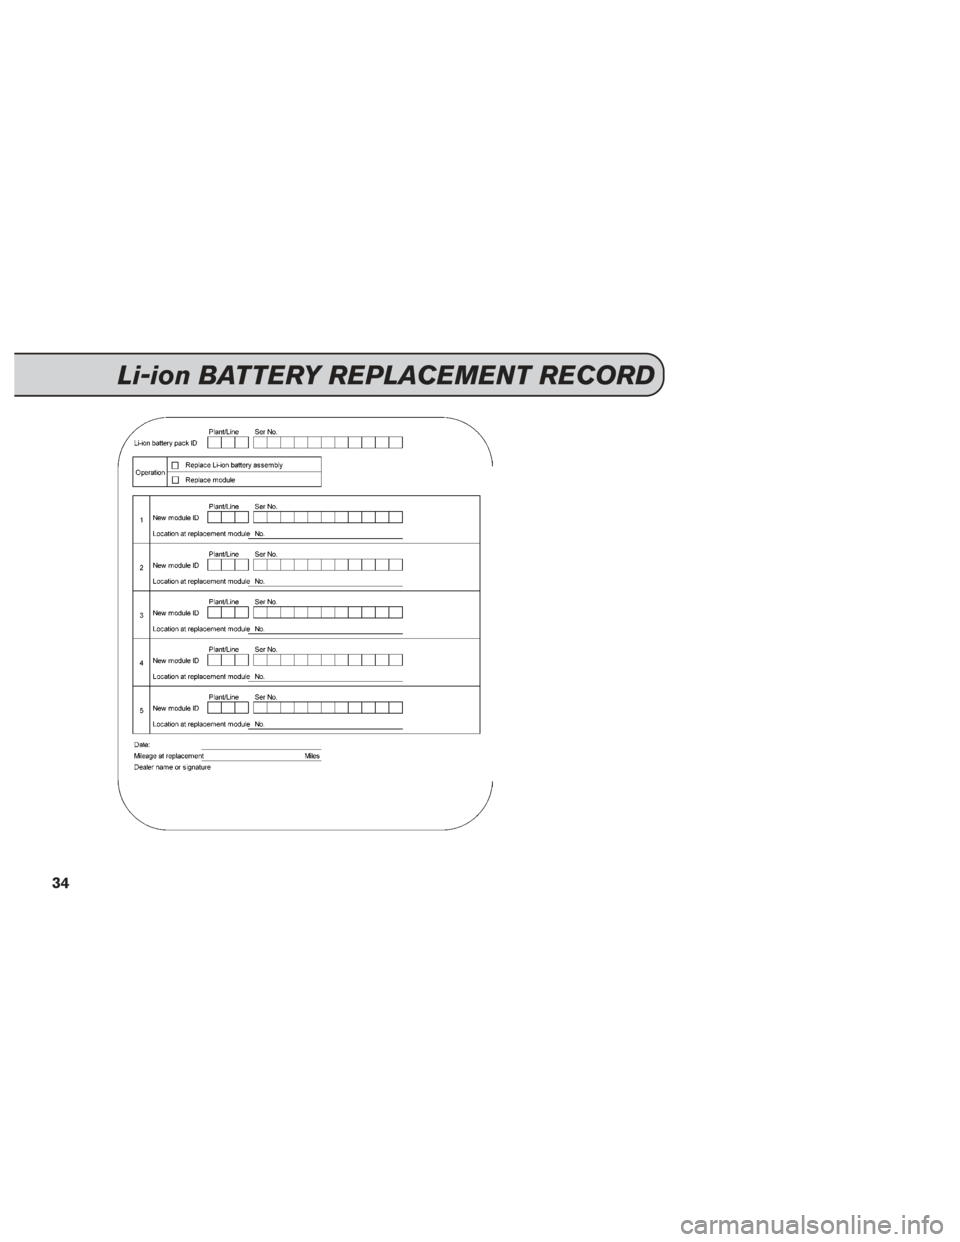 NISSAN LEAF 2013 1.G Service And Maintenance Guide Li-ion BATTERY REPLACEMENT RECORD
34 